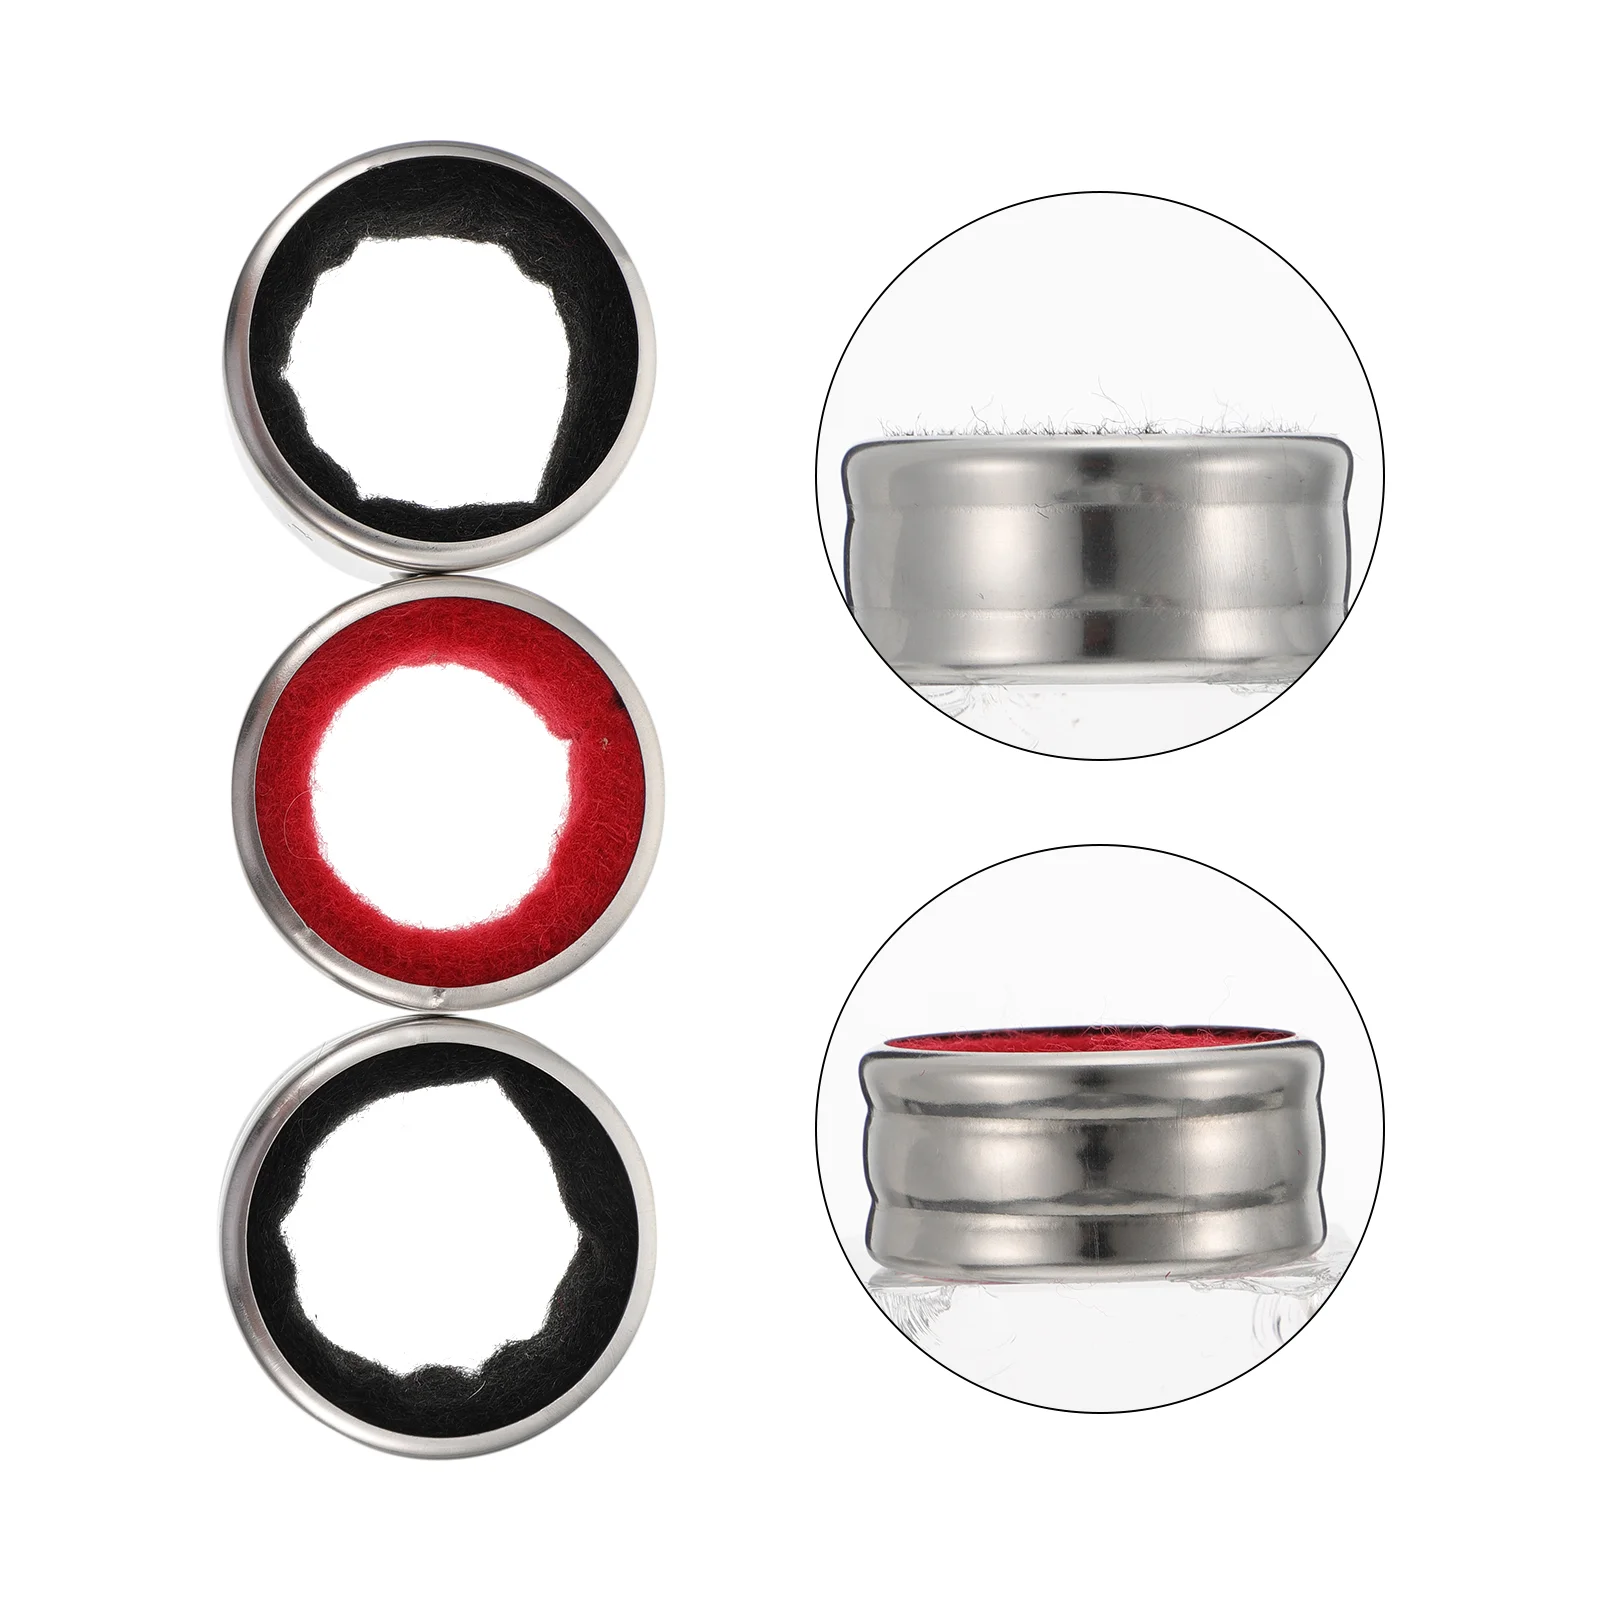 

Drip Bottle Collar Ring Rings Steel Stainless Collars Stop Red Proof Beer Beverage Circle Sleek Catcher Neck Kitchen Gadgets